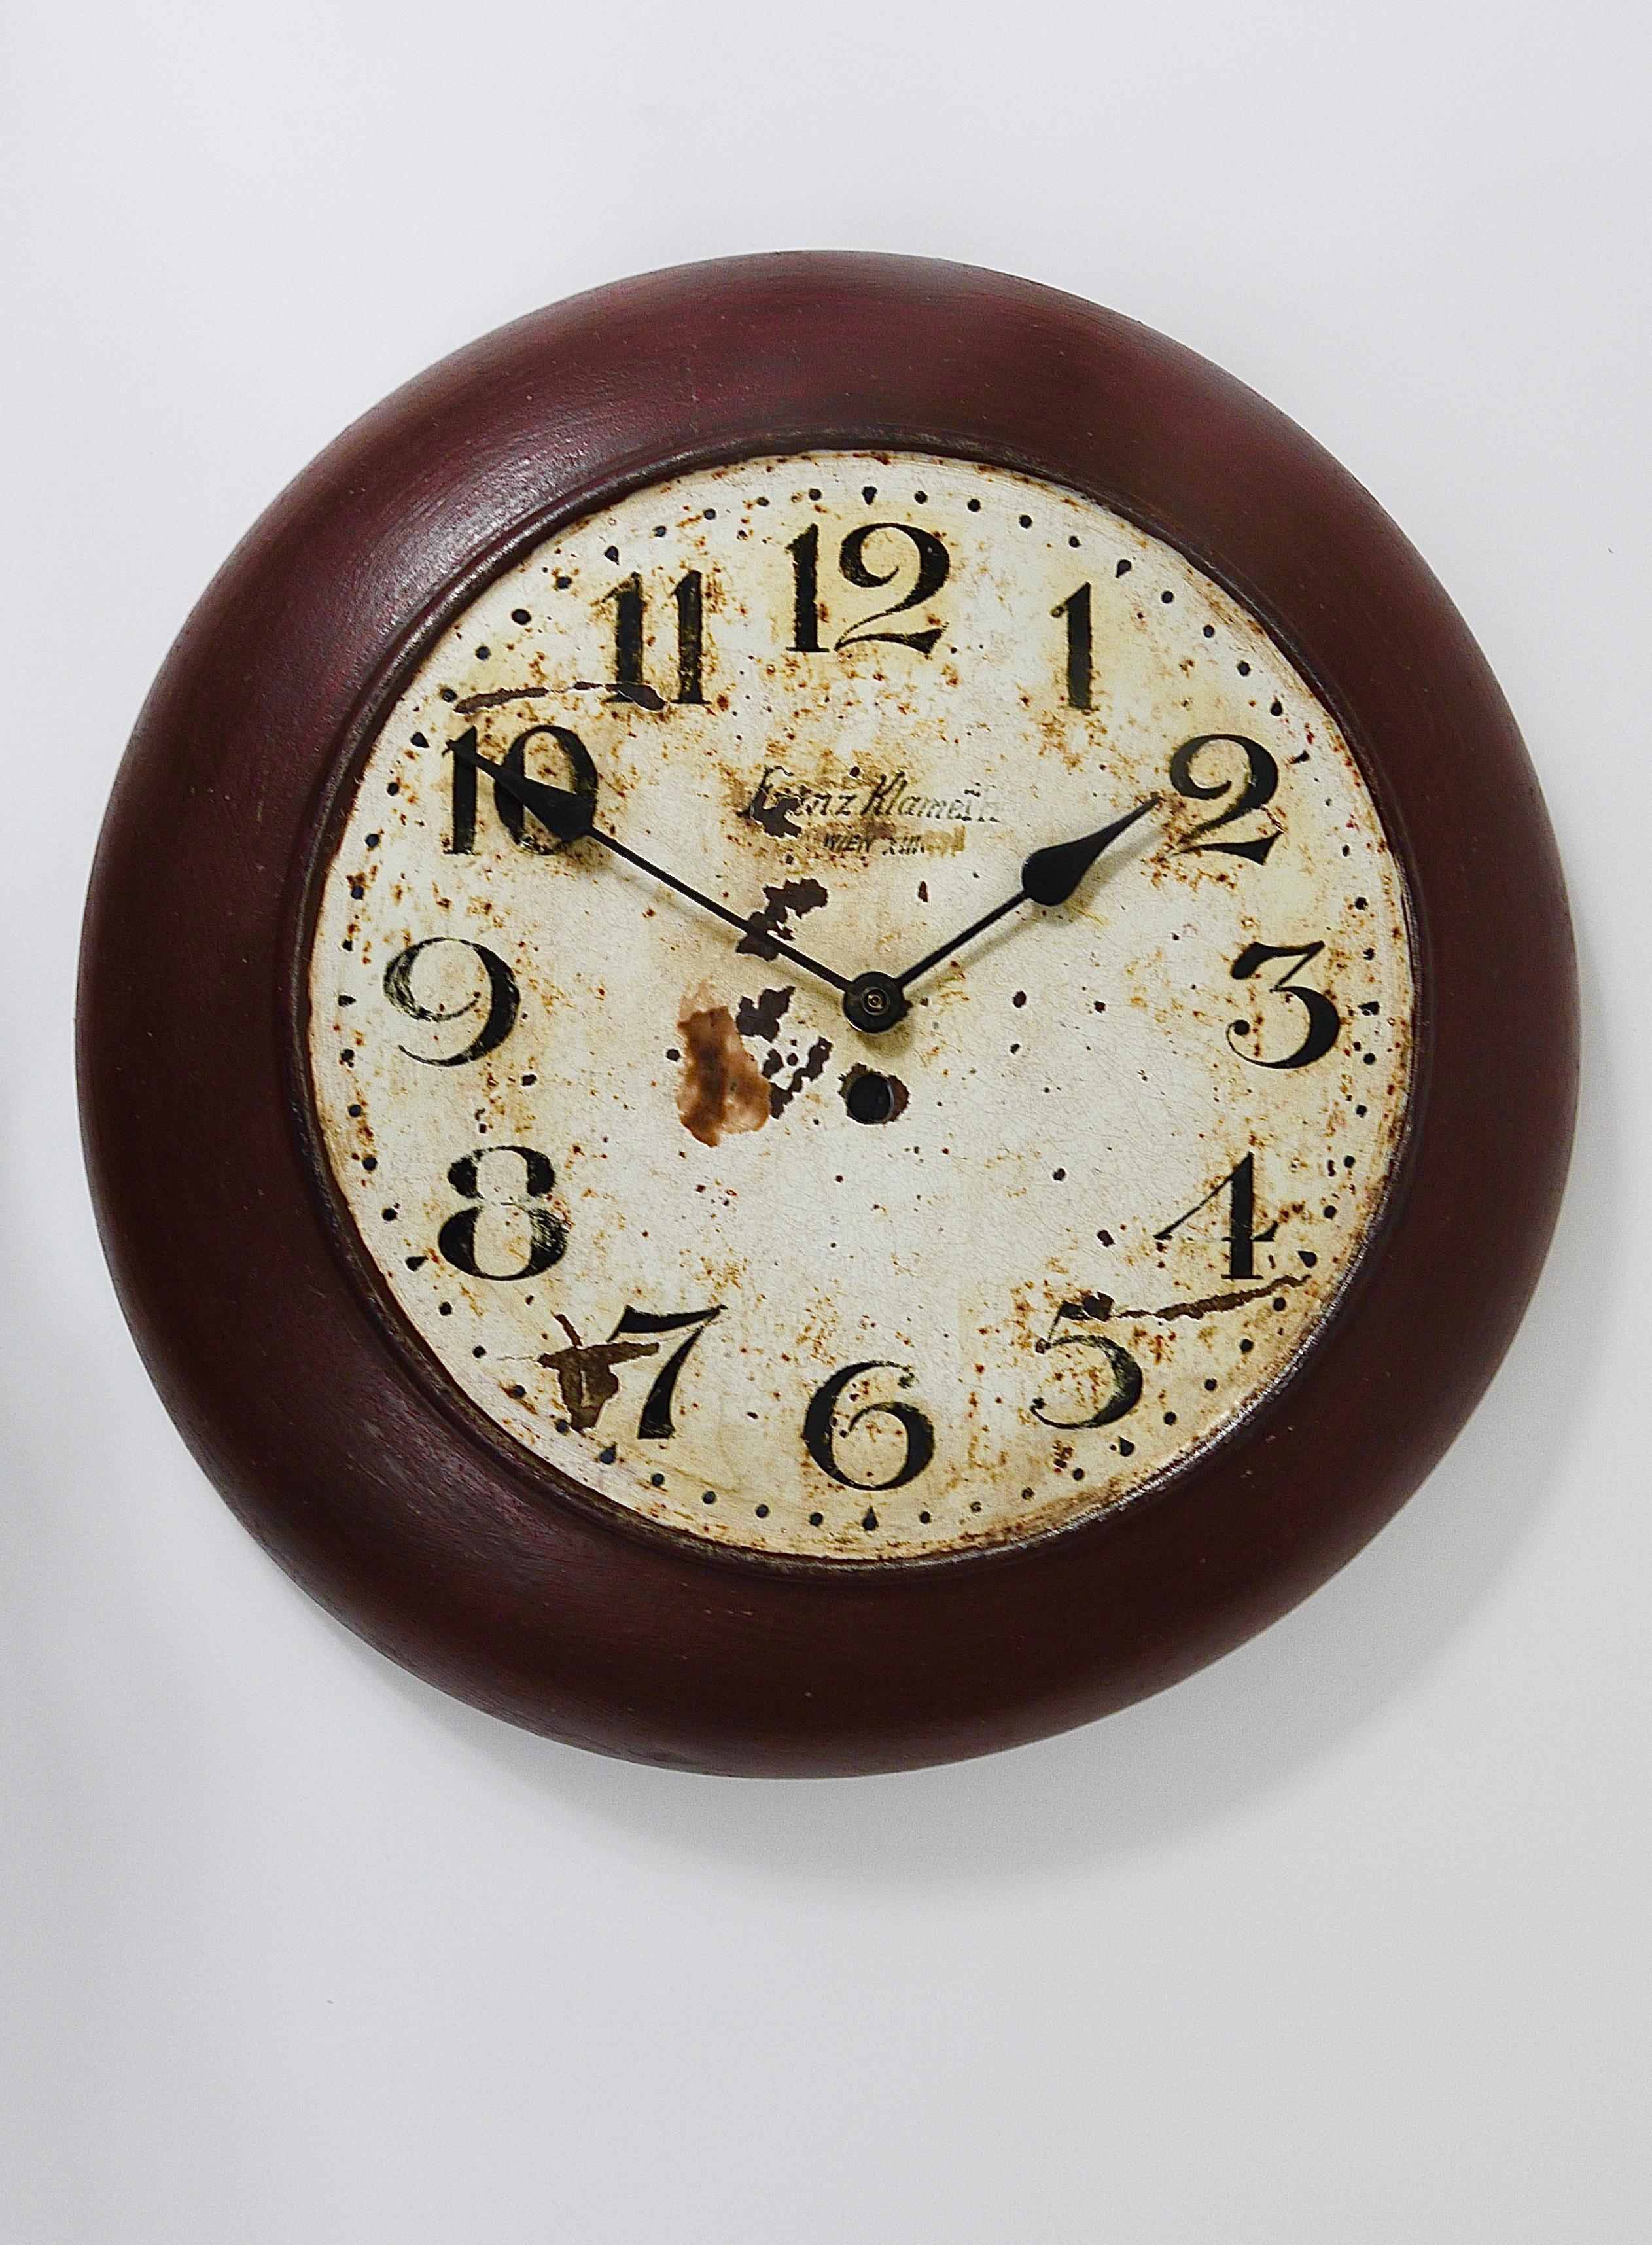 Antique 1920s Public Iron Wall Clock With Hand-Painted Dial, Industrial Style For Sale 7